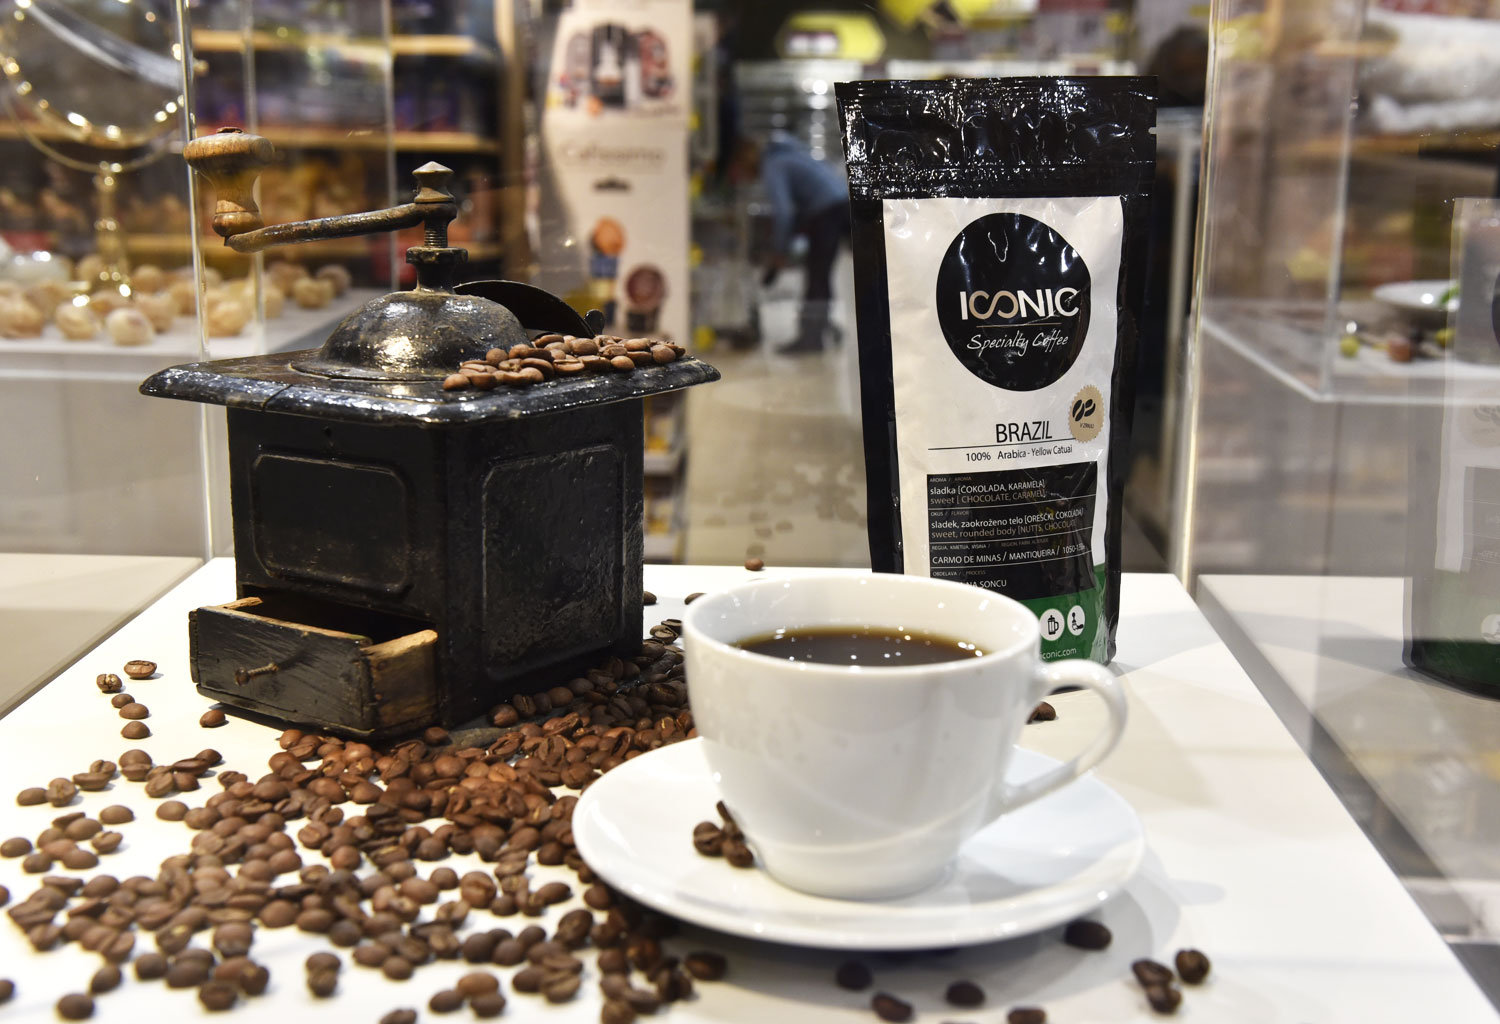 Iconic Specialty Coffee